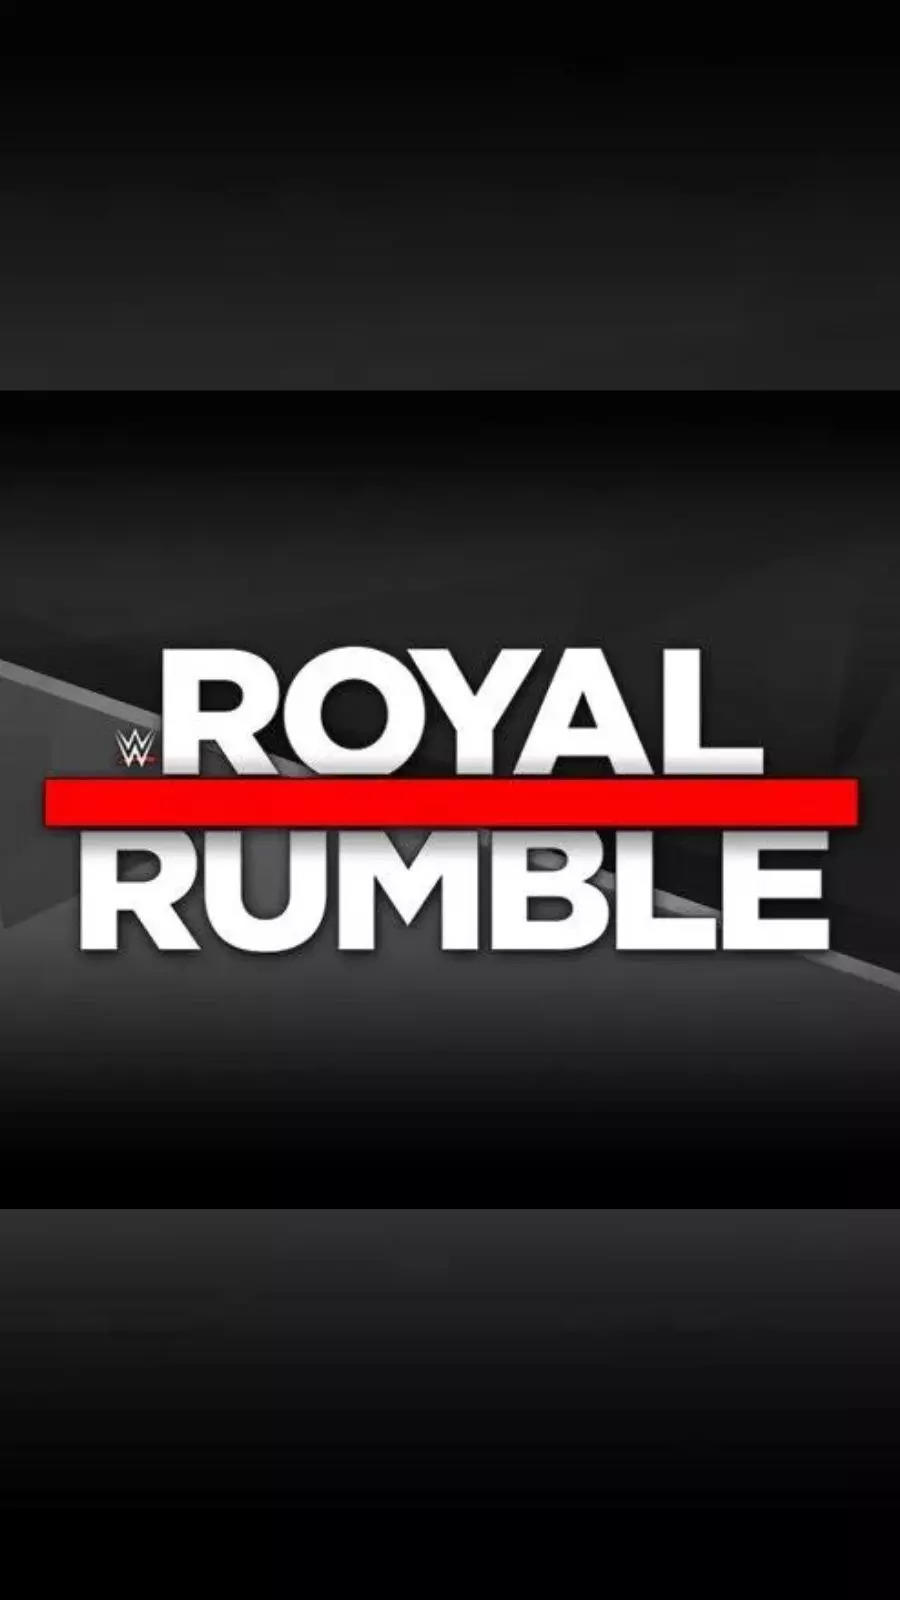 Top 10 quickest WWE Royal Rumble eliminations of all time